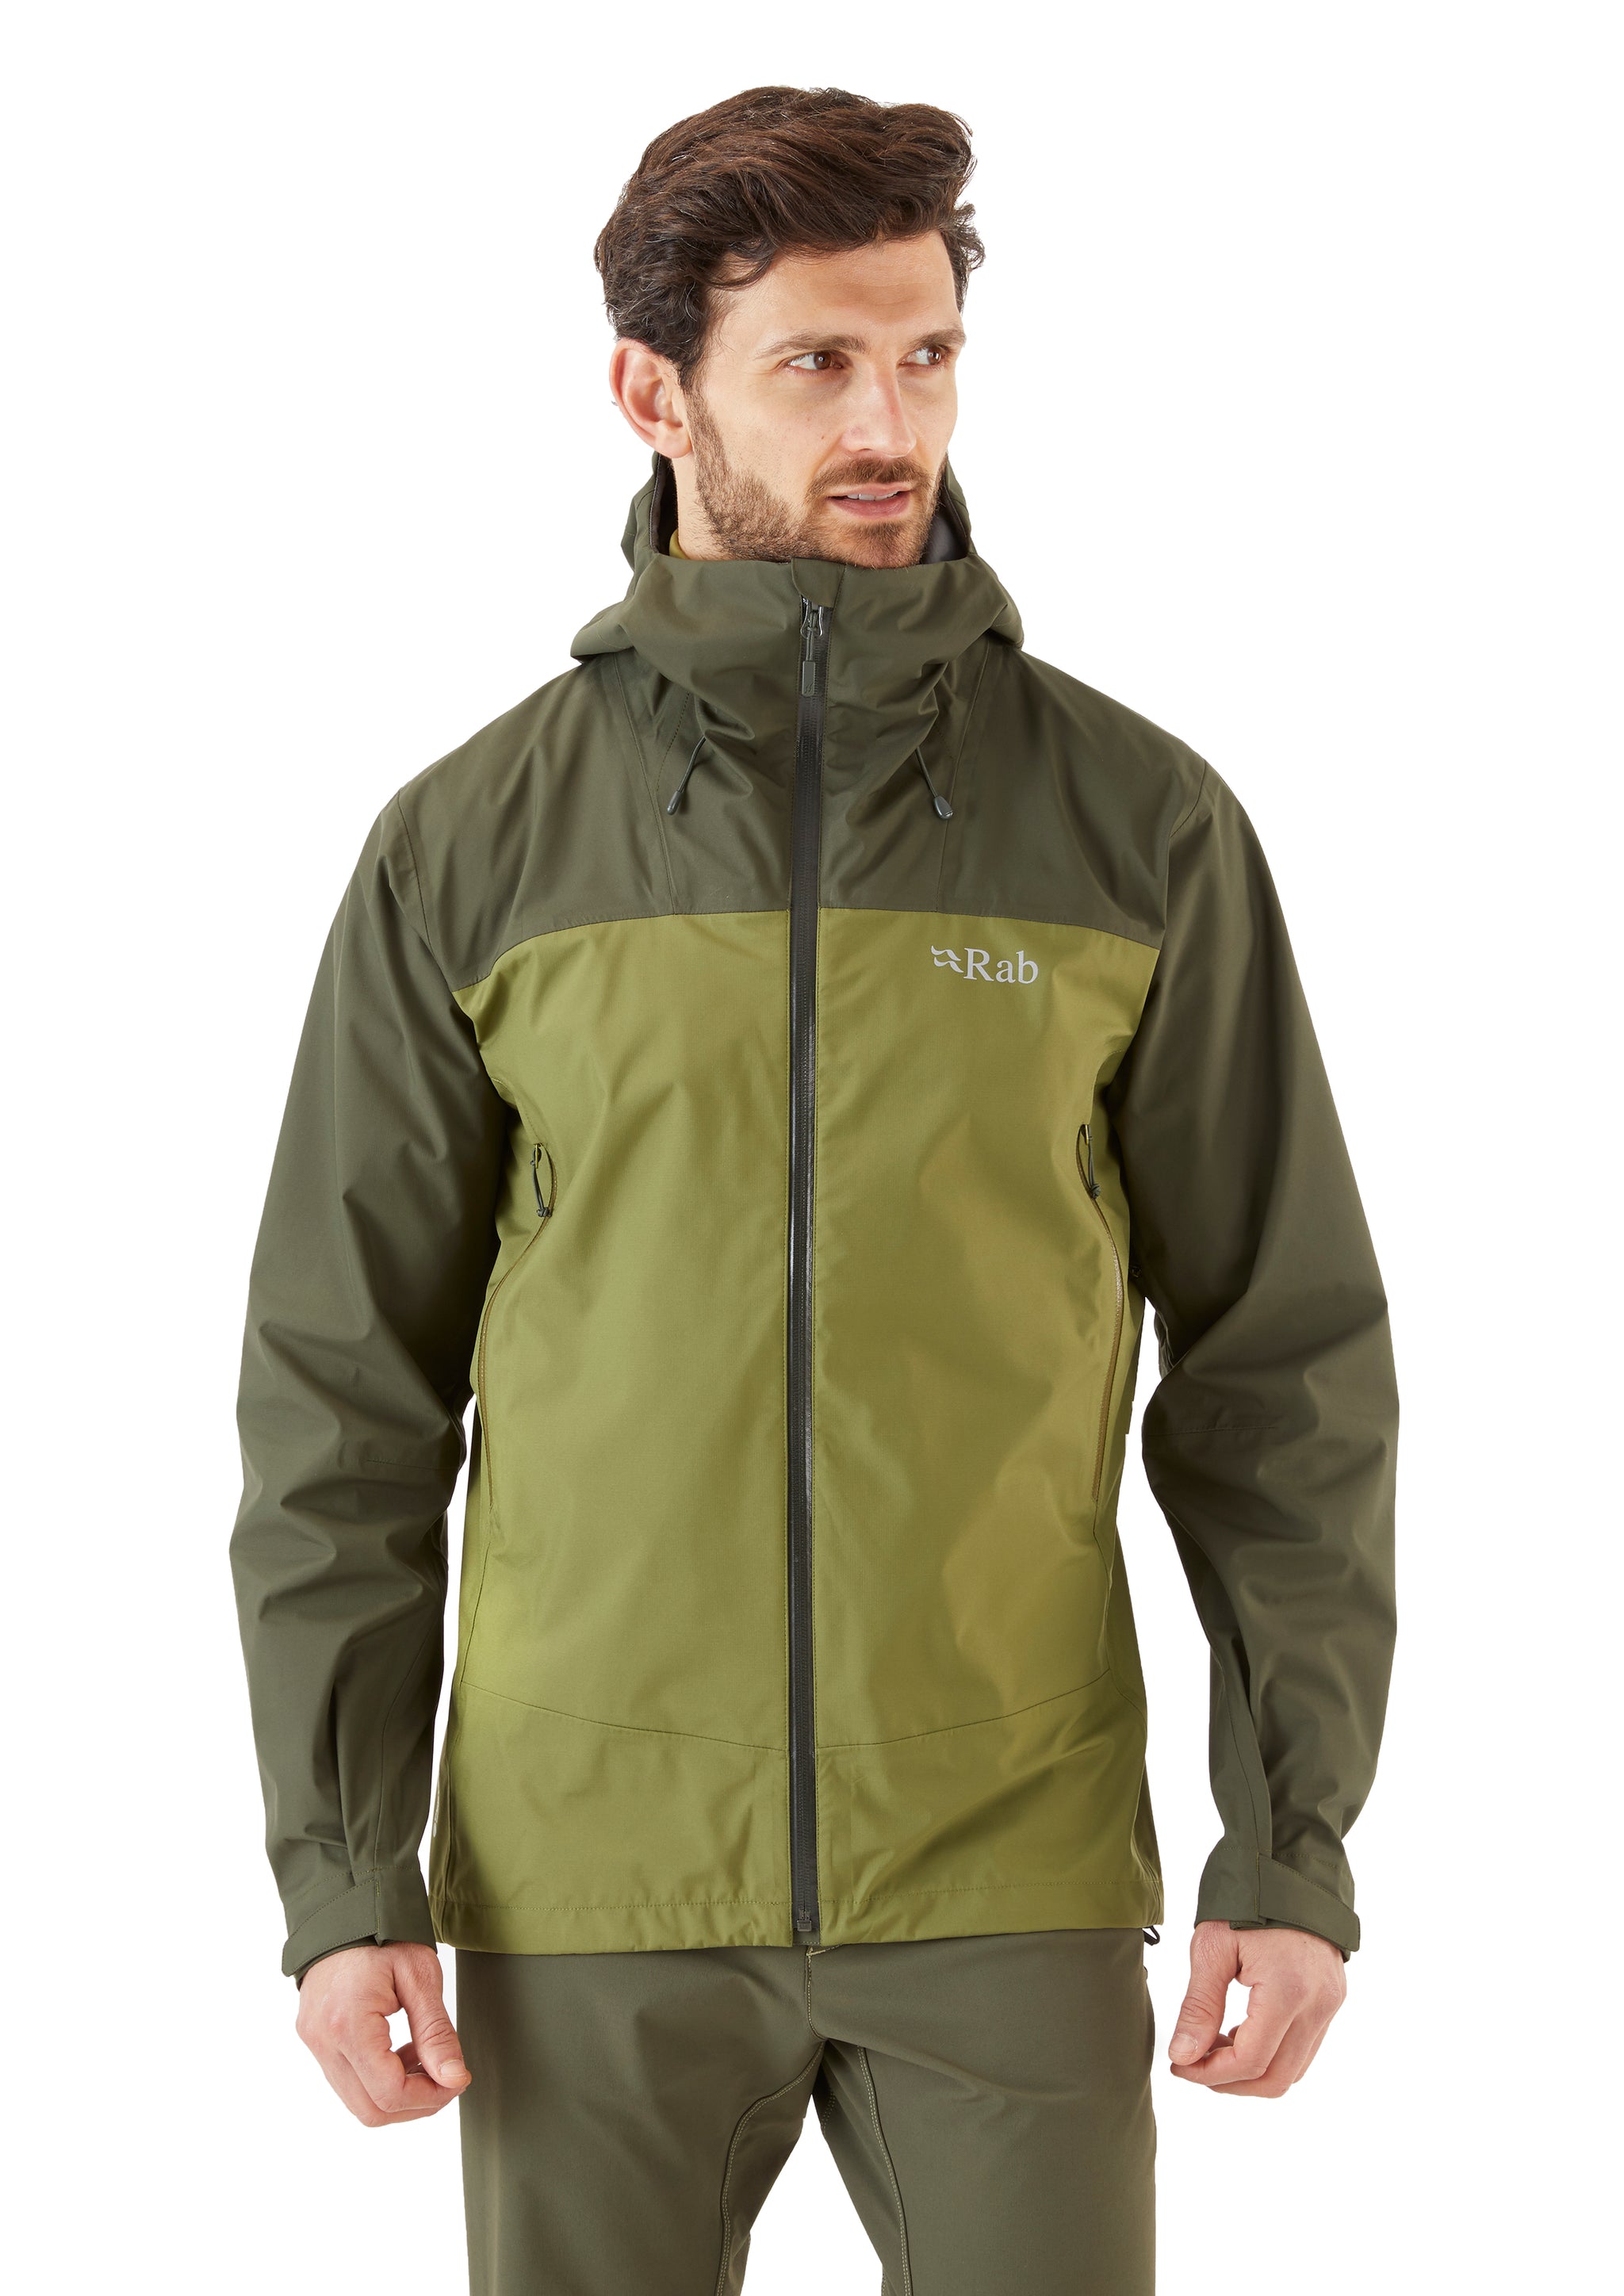 Rab Men's Arc Eco Jacket - Outfitters Store